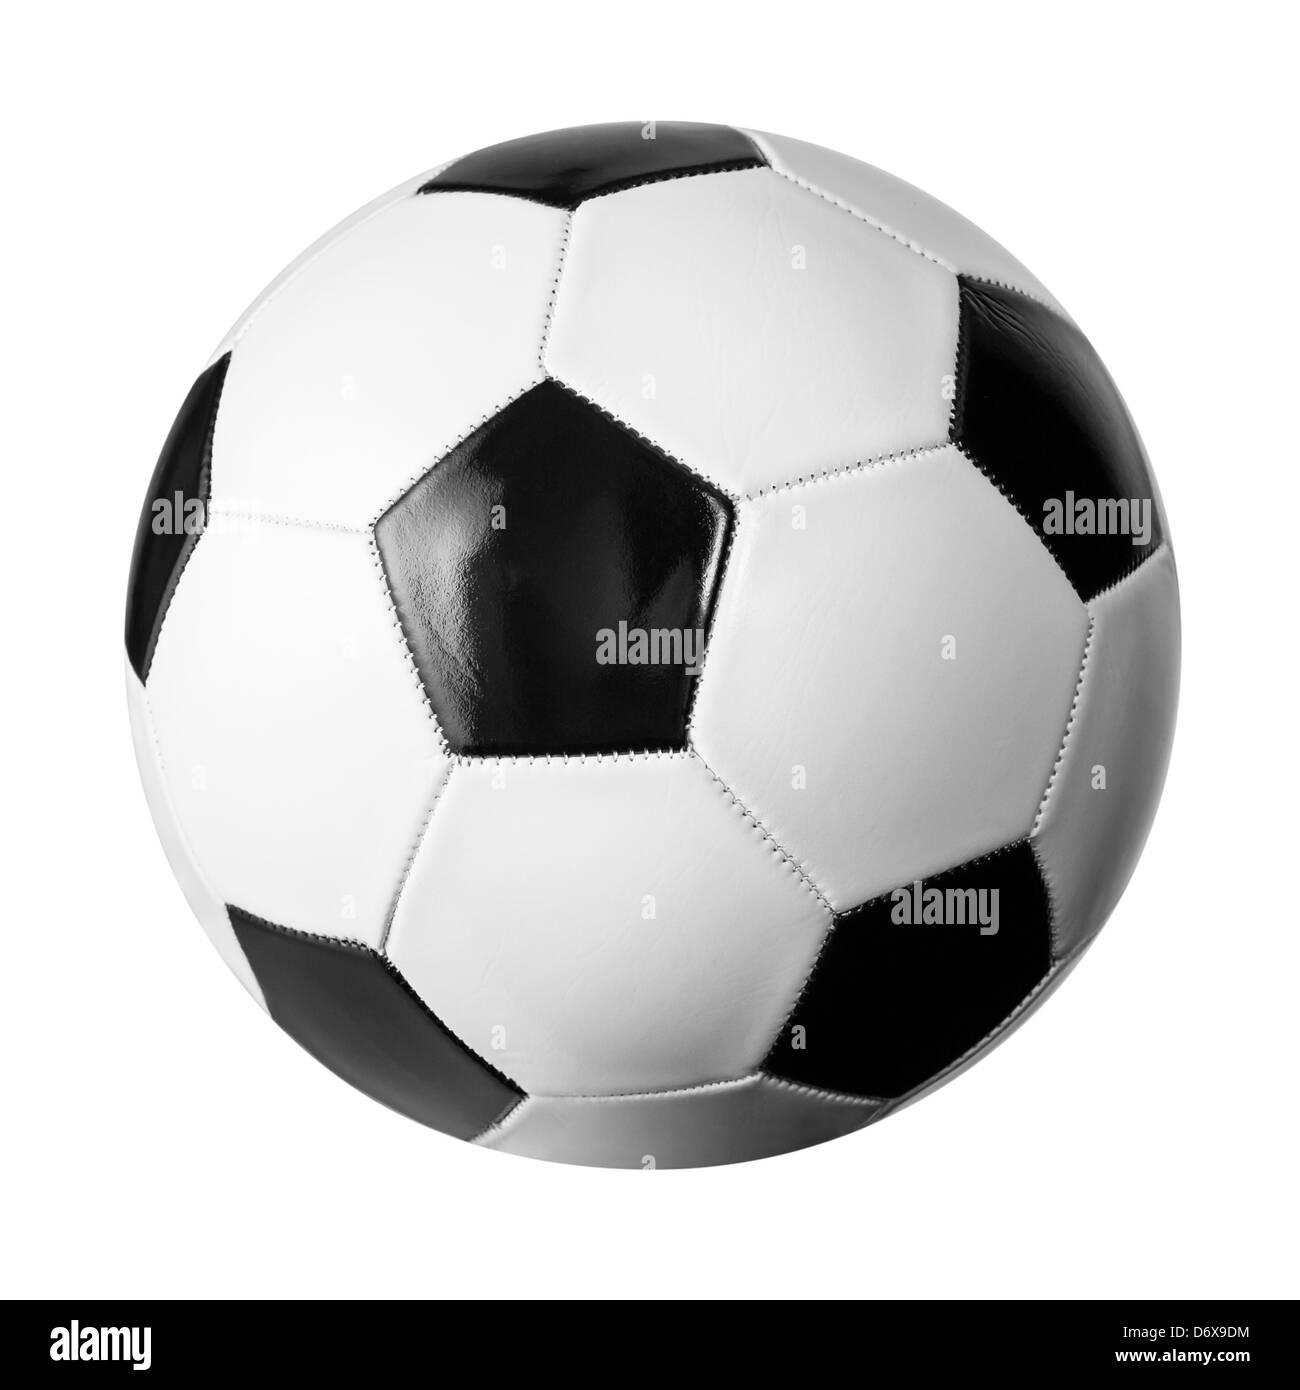 Soccer ball isolated on white with clipping path included Stock Photo